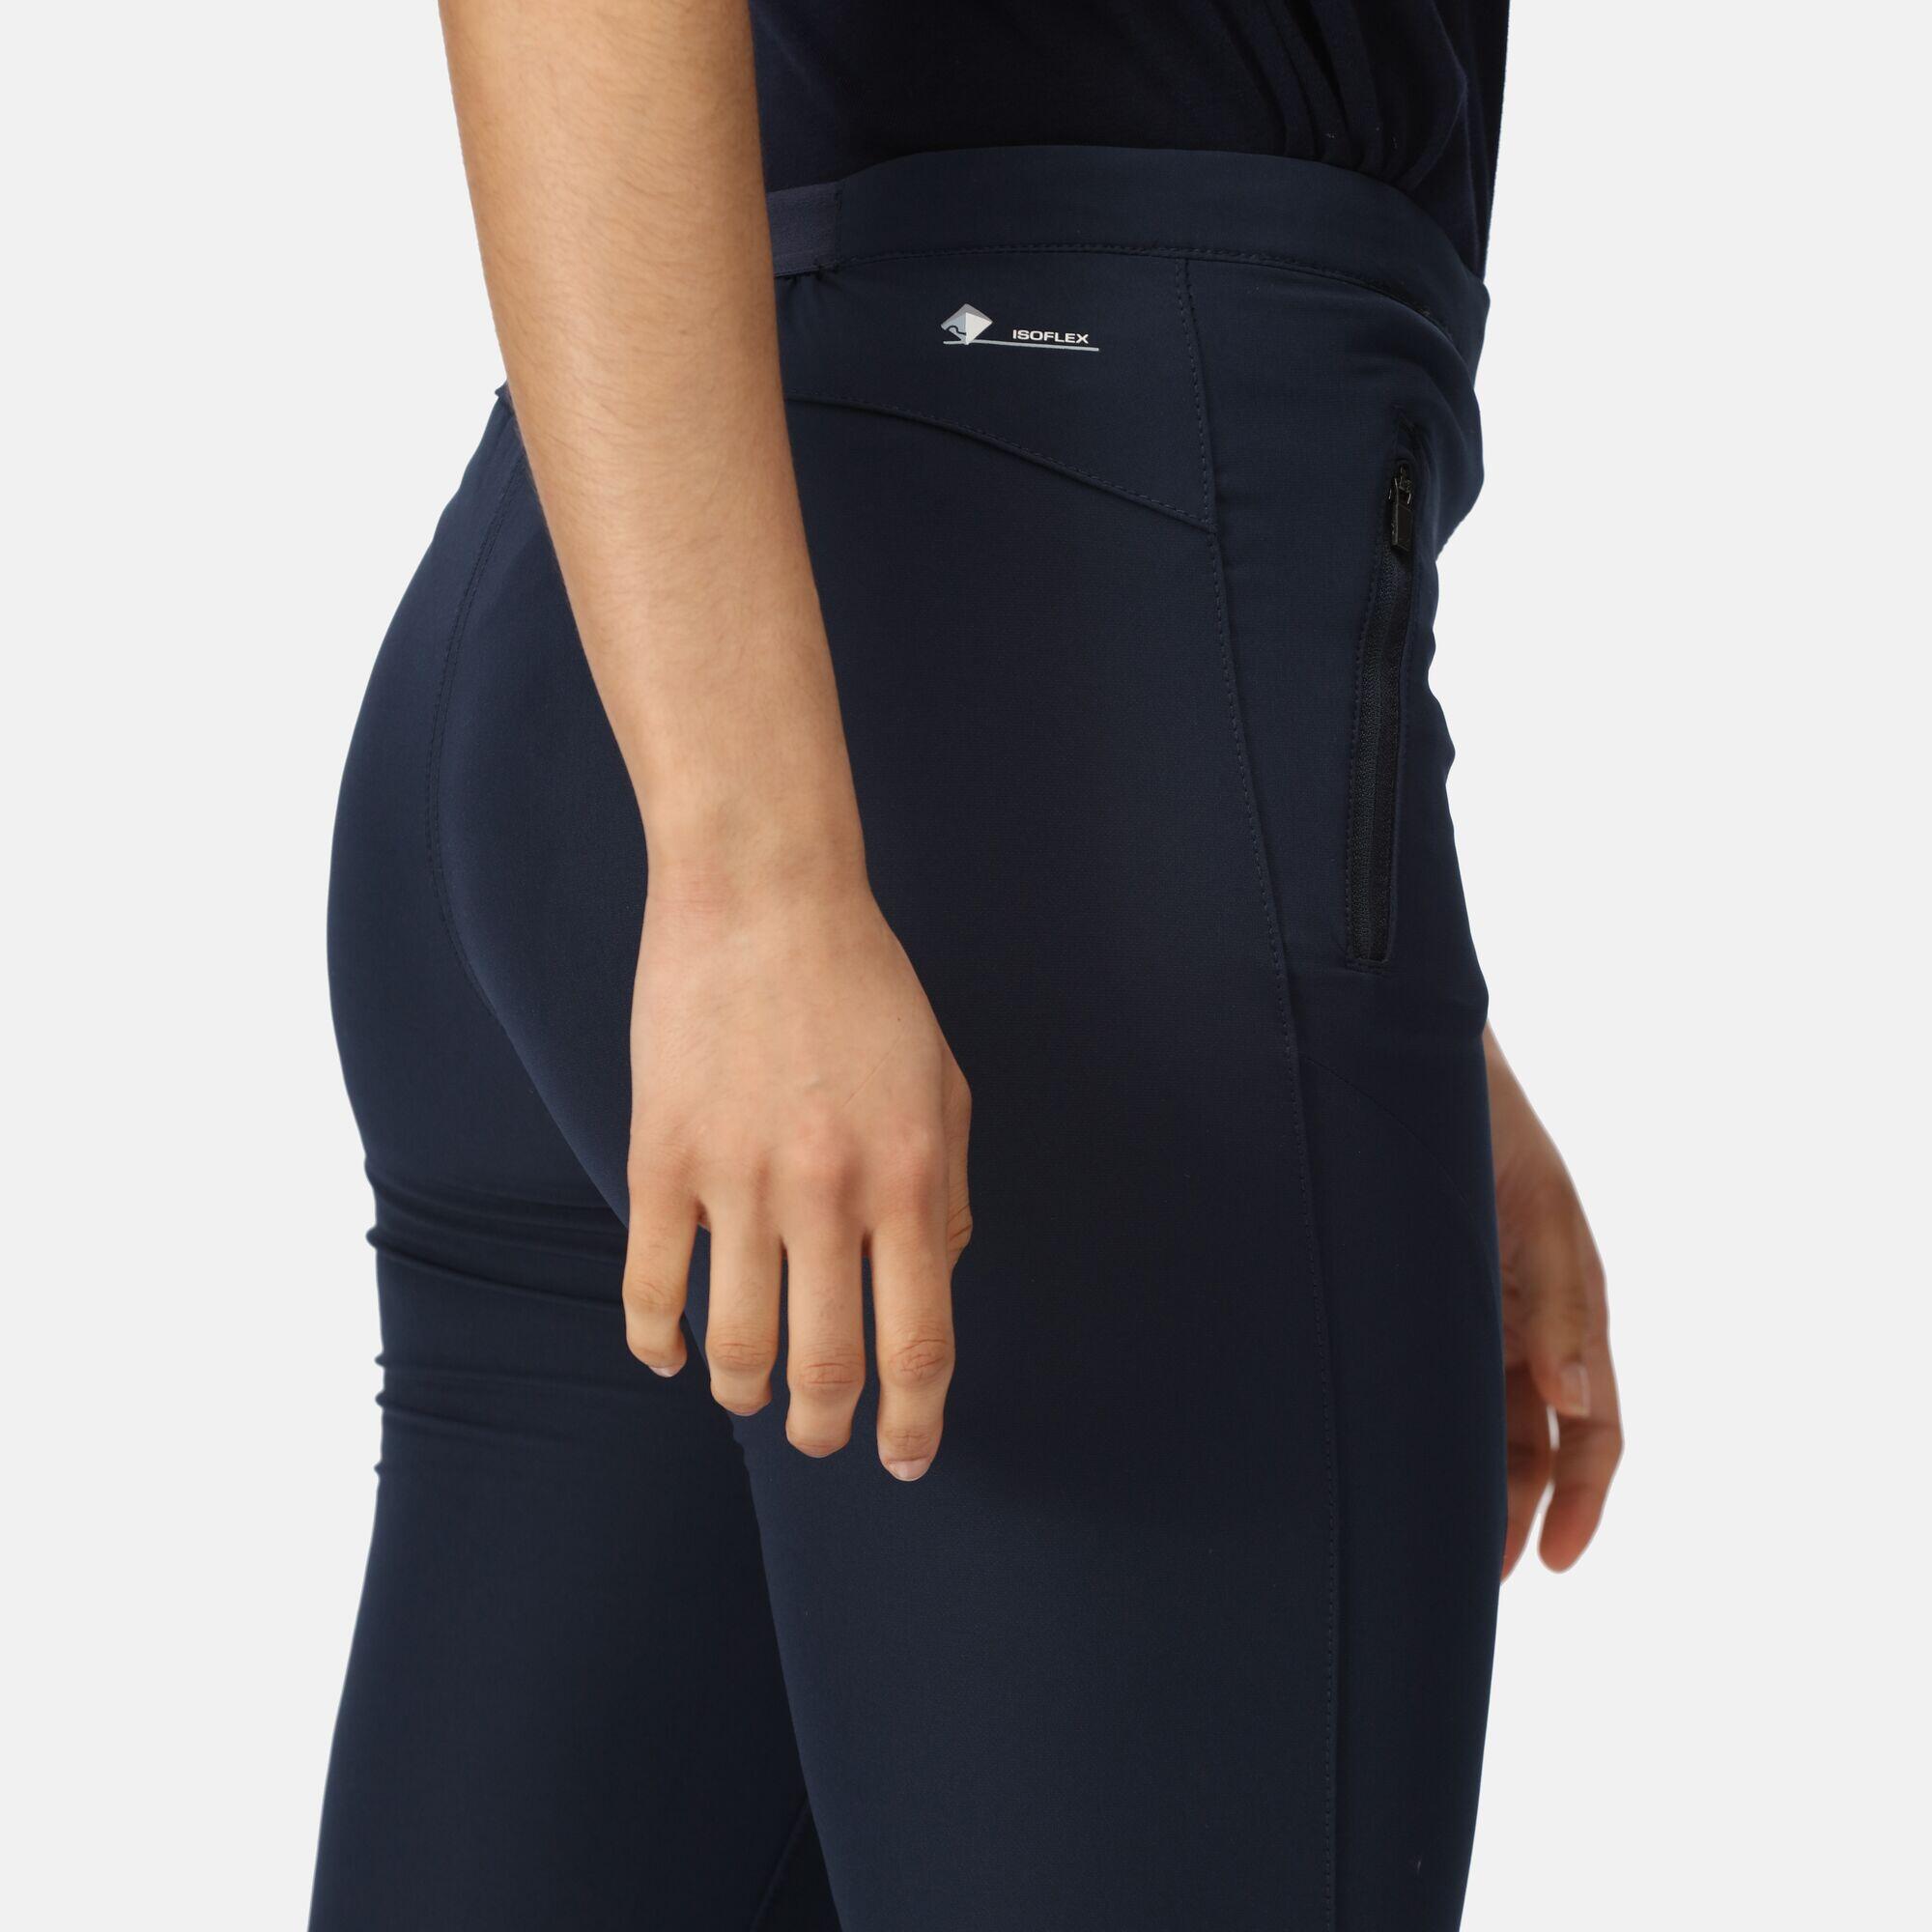 Pentre Stretch Women's Hiking Trousers - Navy 5/5